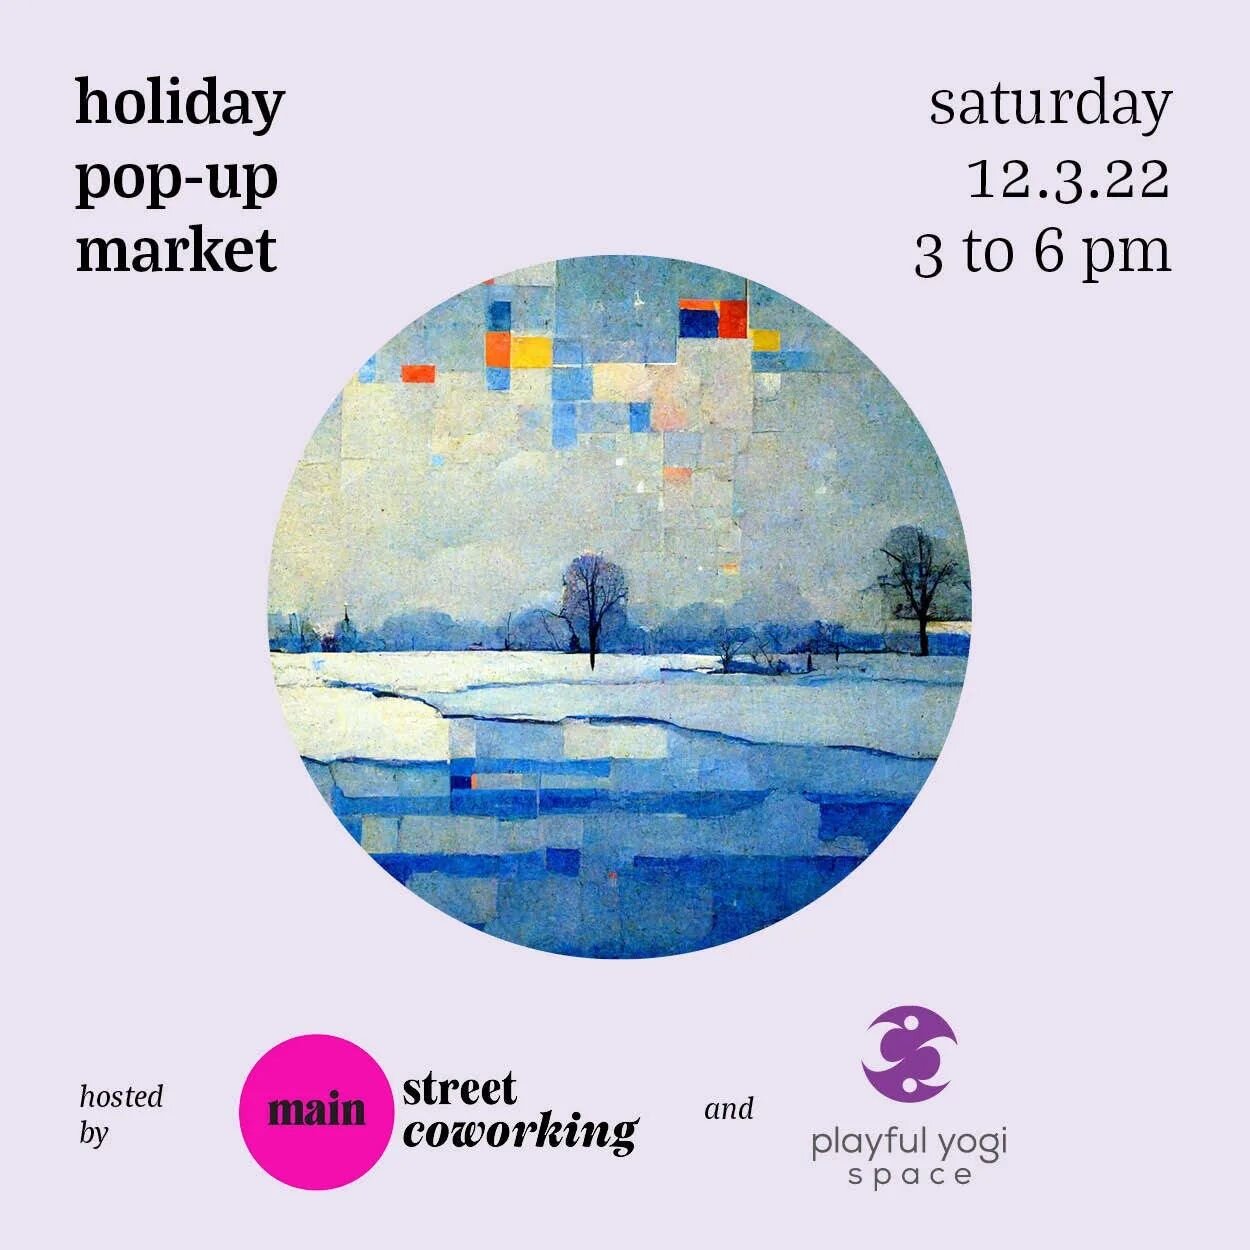 Come, one and all, to our holiday pop up market!

It's taking place this Saturday (Dec. 3rd) from 3 to 6 pm here at @mainstreetcoworking and also at @playfulyogispace &mdash; the lovely yoga studio across the street.

Guys, it's going to be epic.

I'